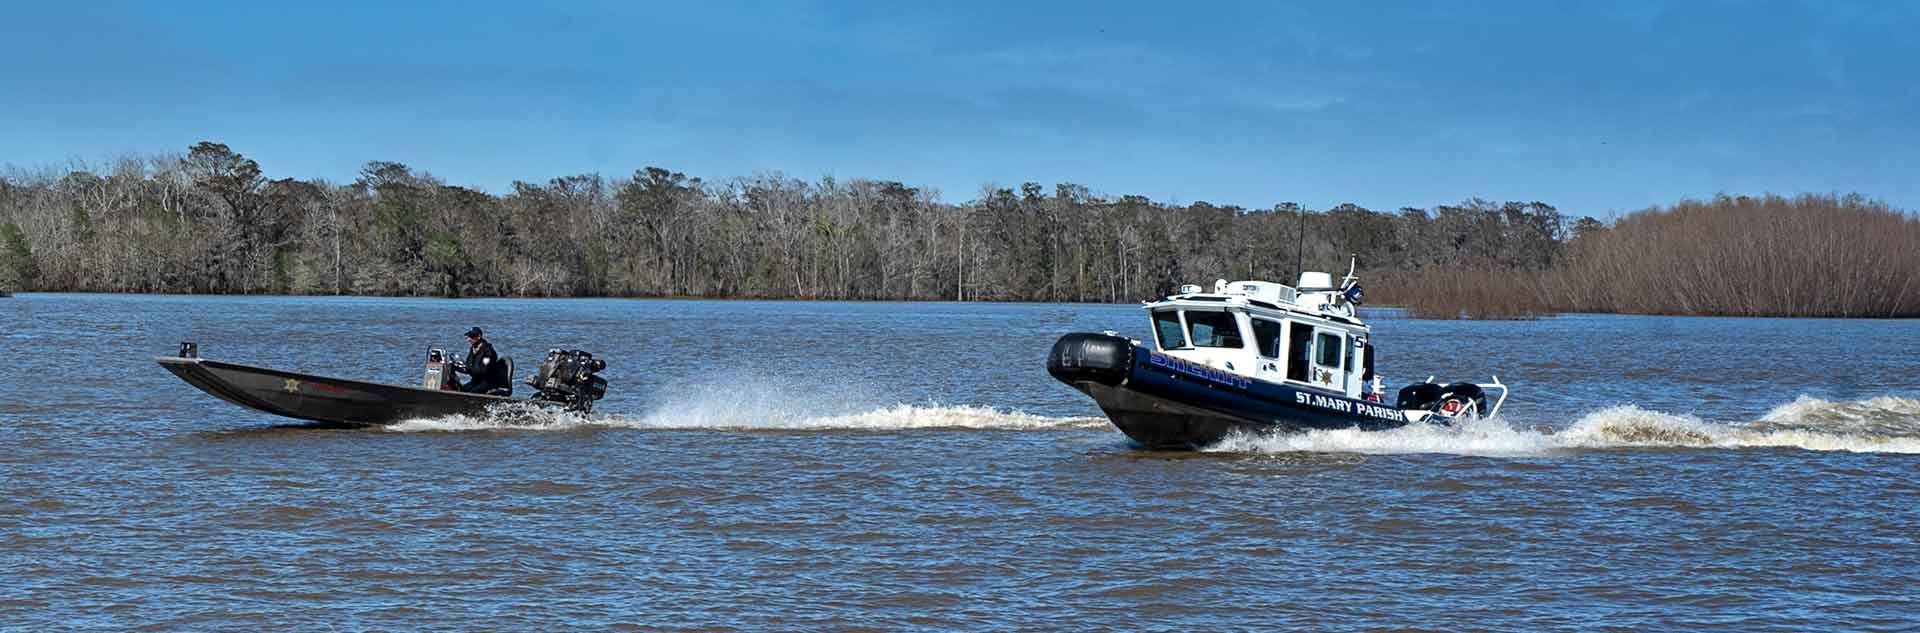 Sheriff Boats out on the water